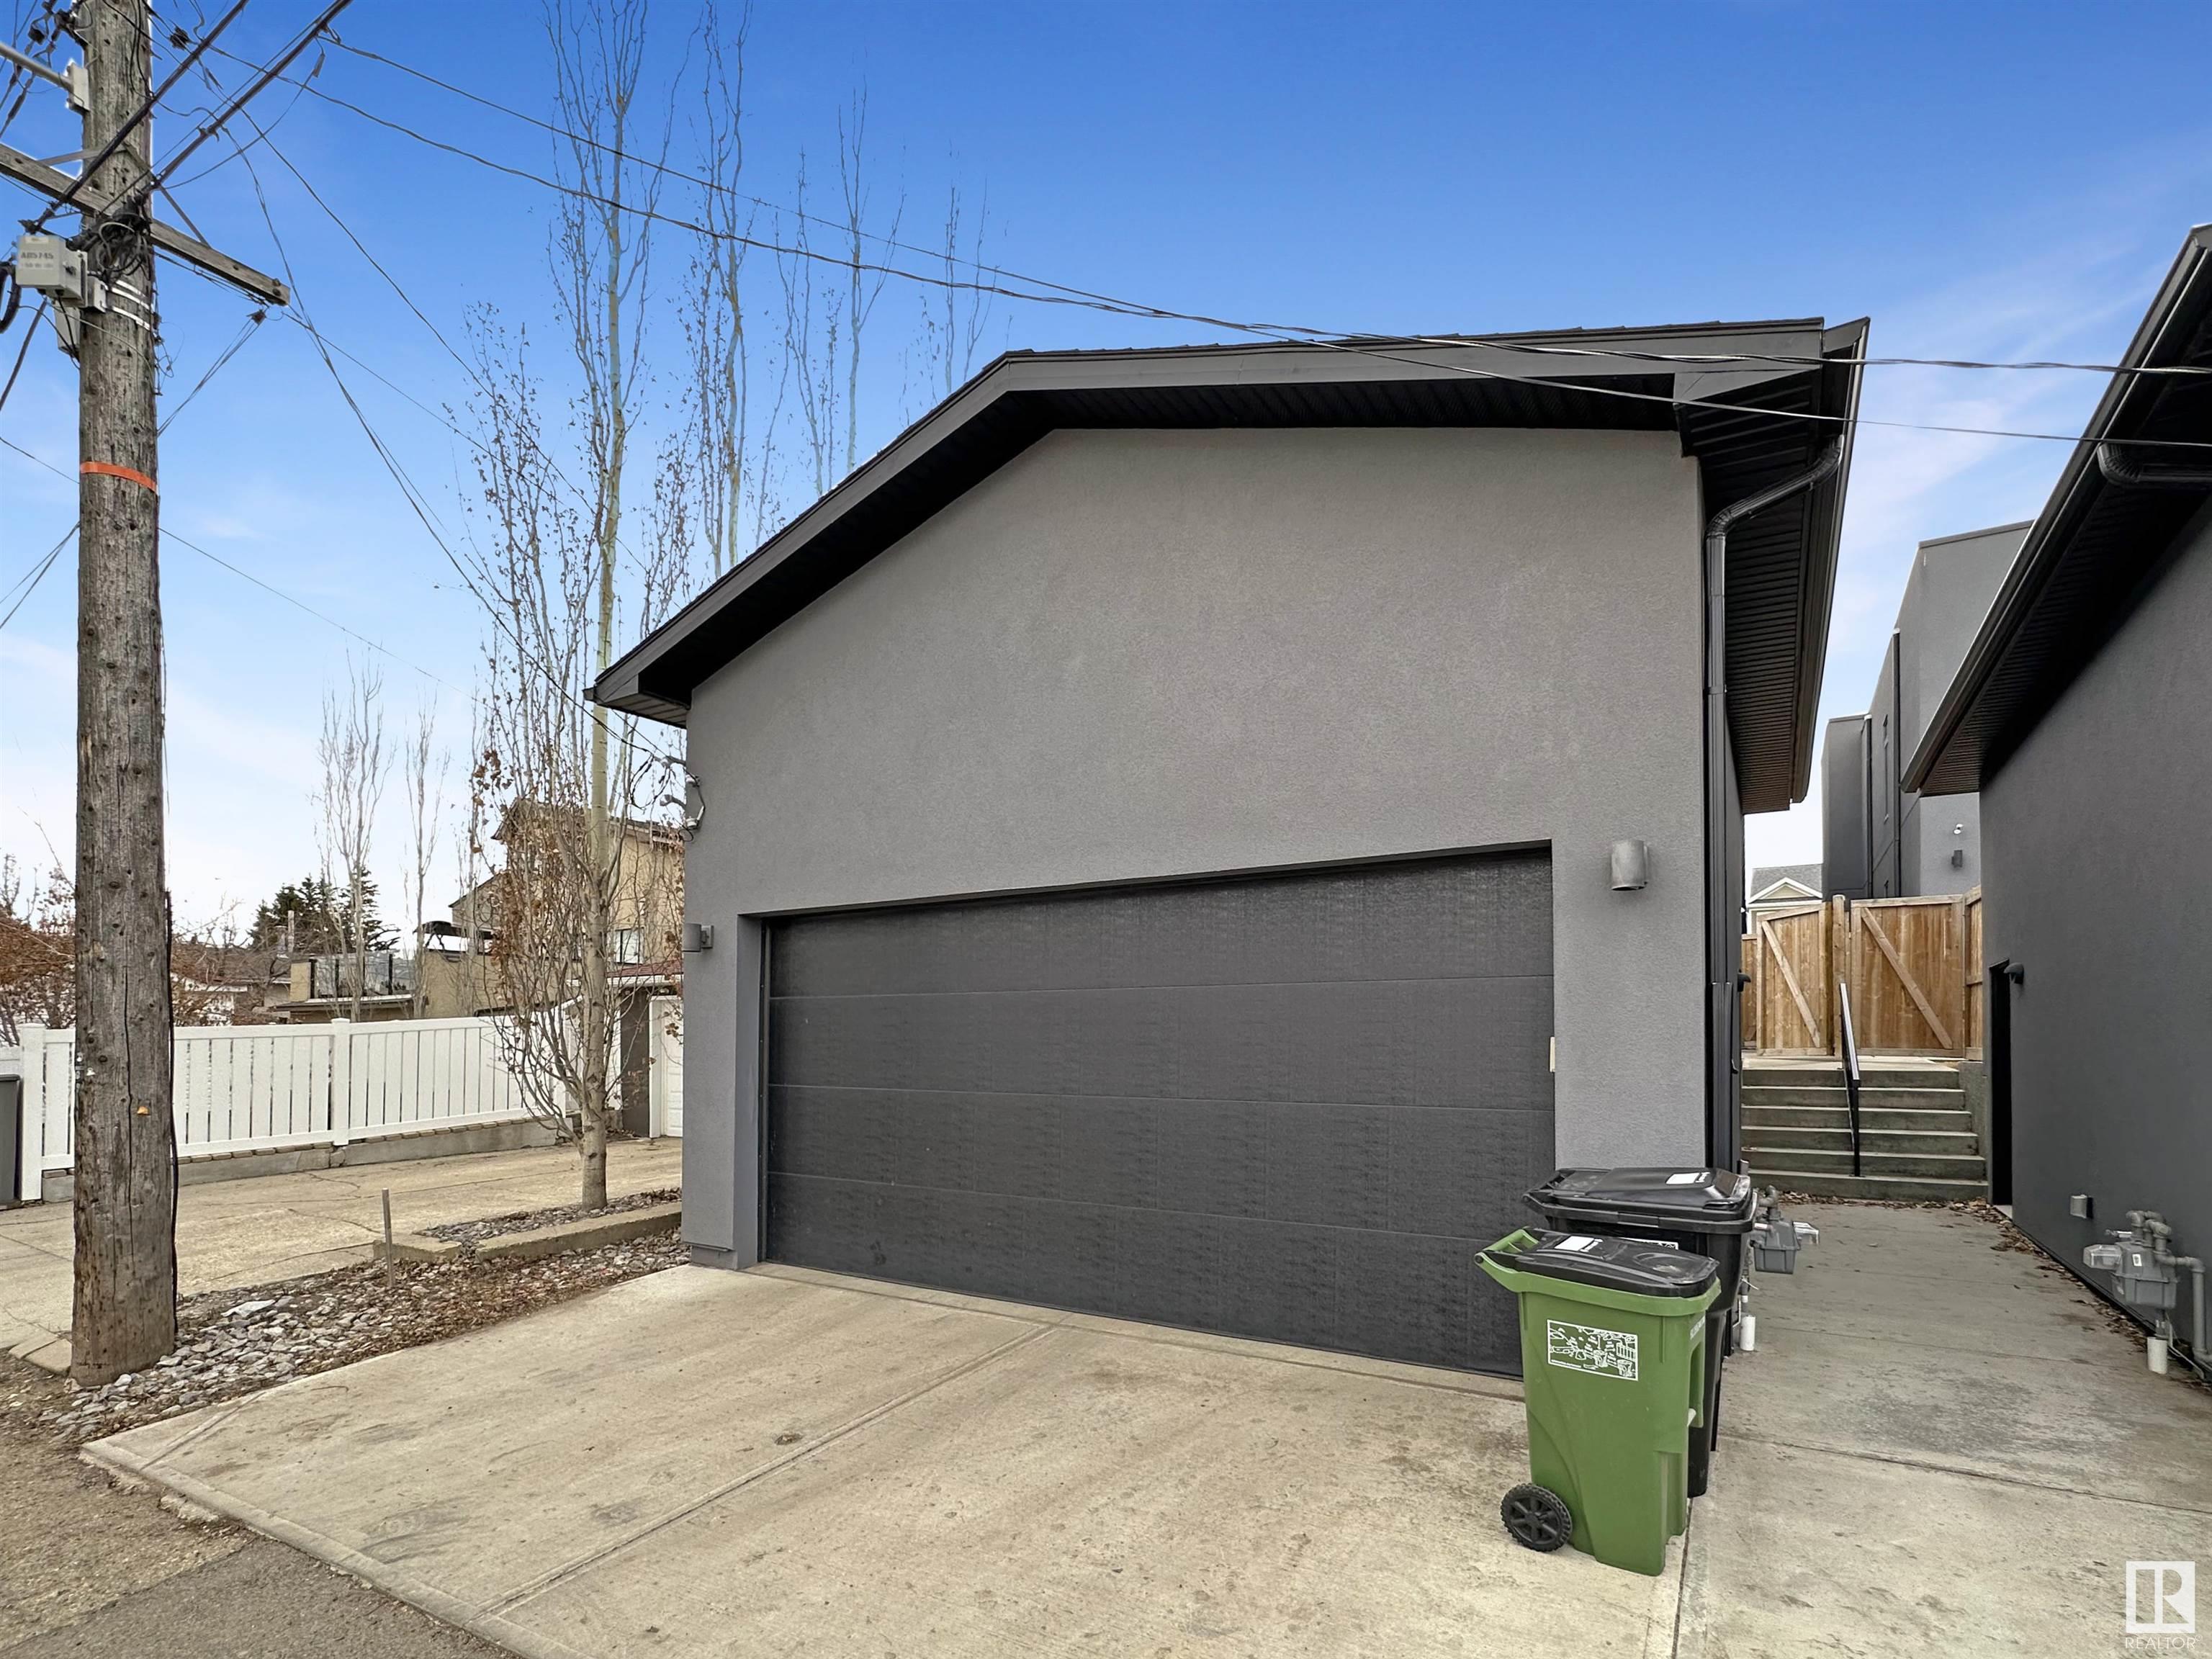      10509 75 ST NW , Edmonton,  ,T6A 2Z6 ;  Listing Number: MLS E4339001